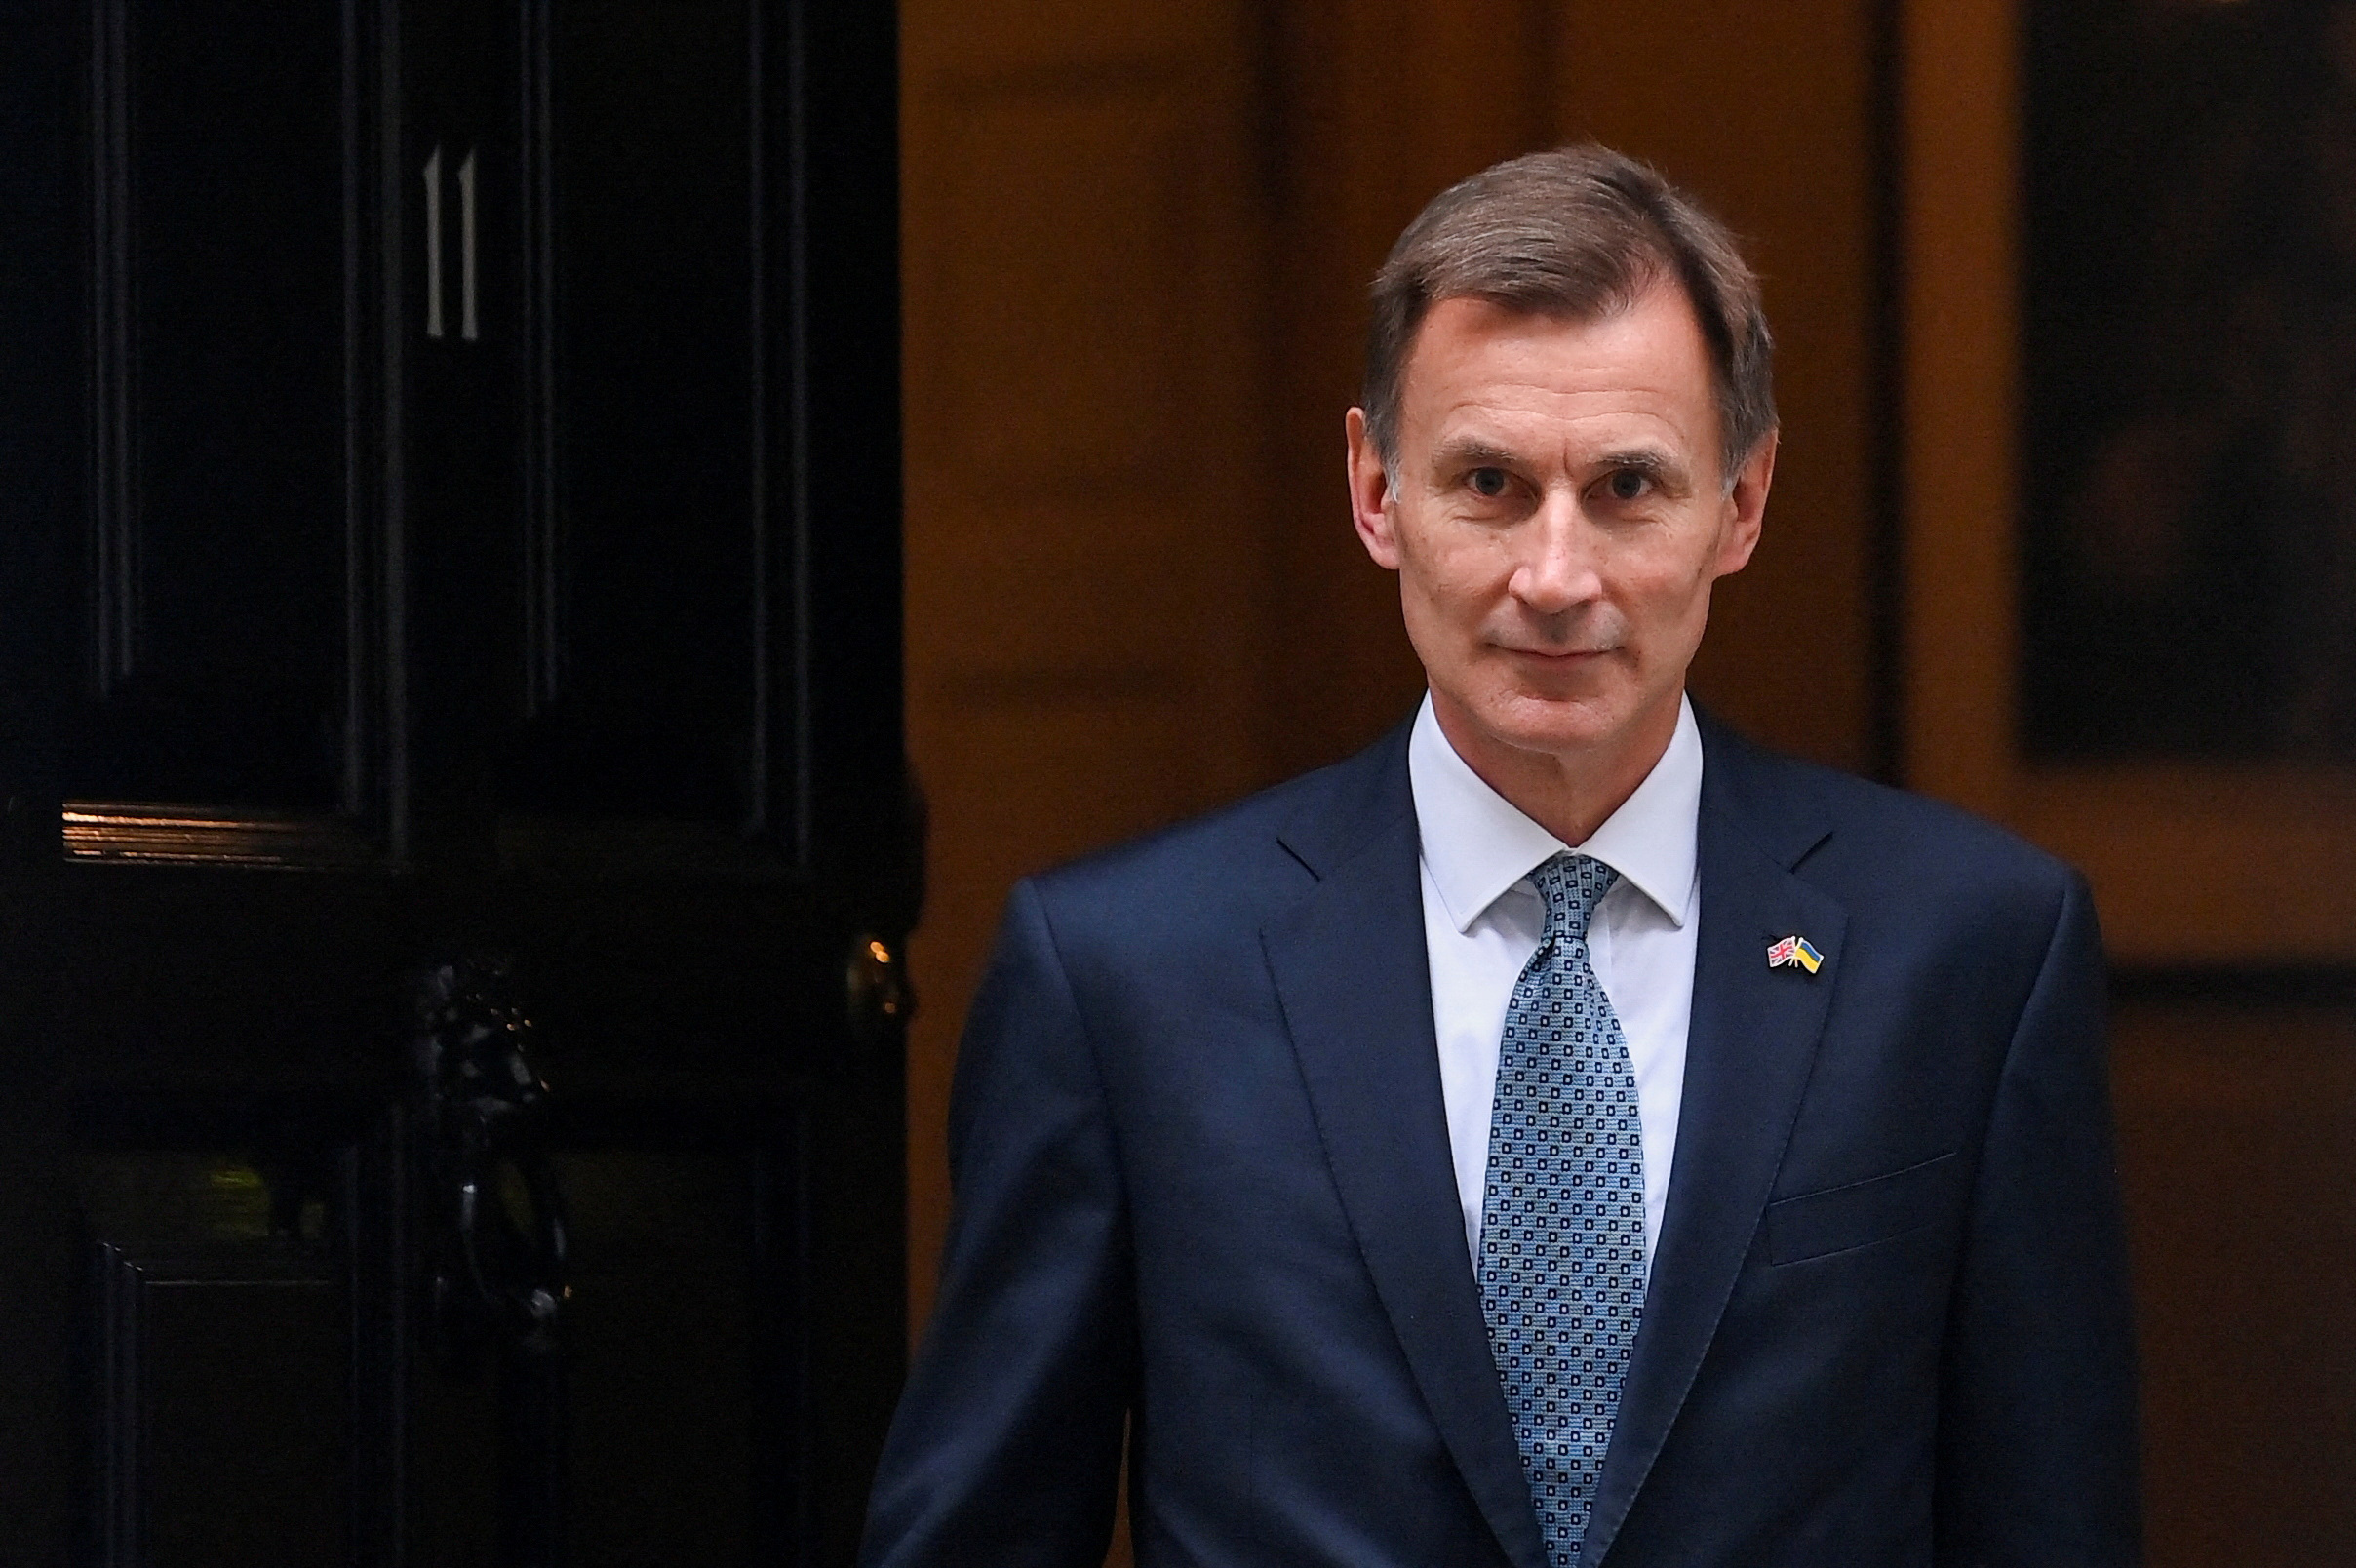 Britain's Chancellor of the Exchequer Jeremy Hunt walks at Downing Street in London